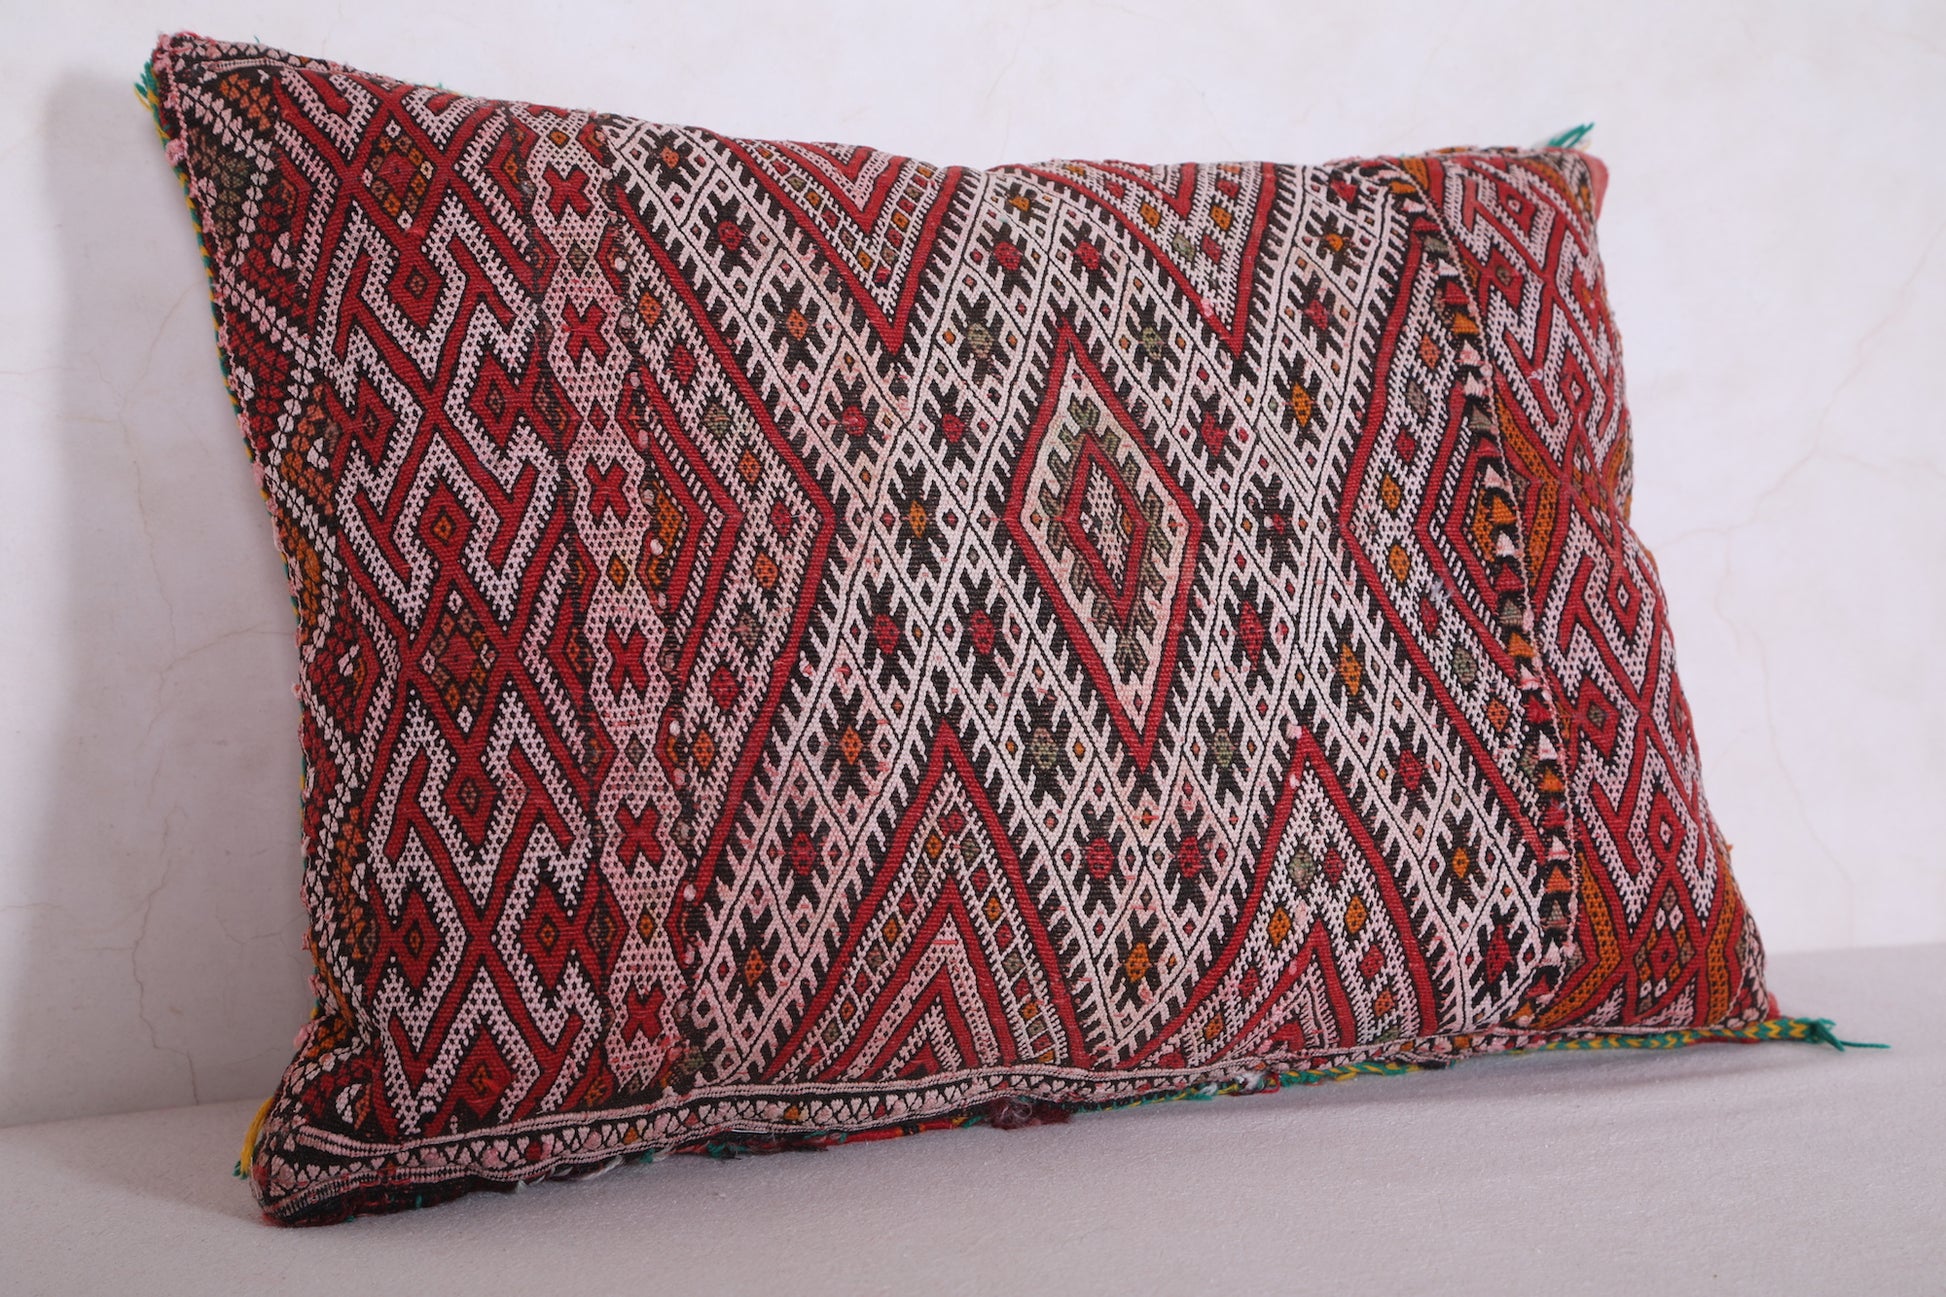 Moroccan pillow 15.3 INCHES X 20.8 INCHES